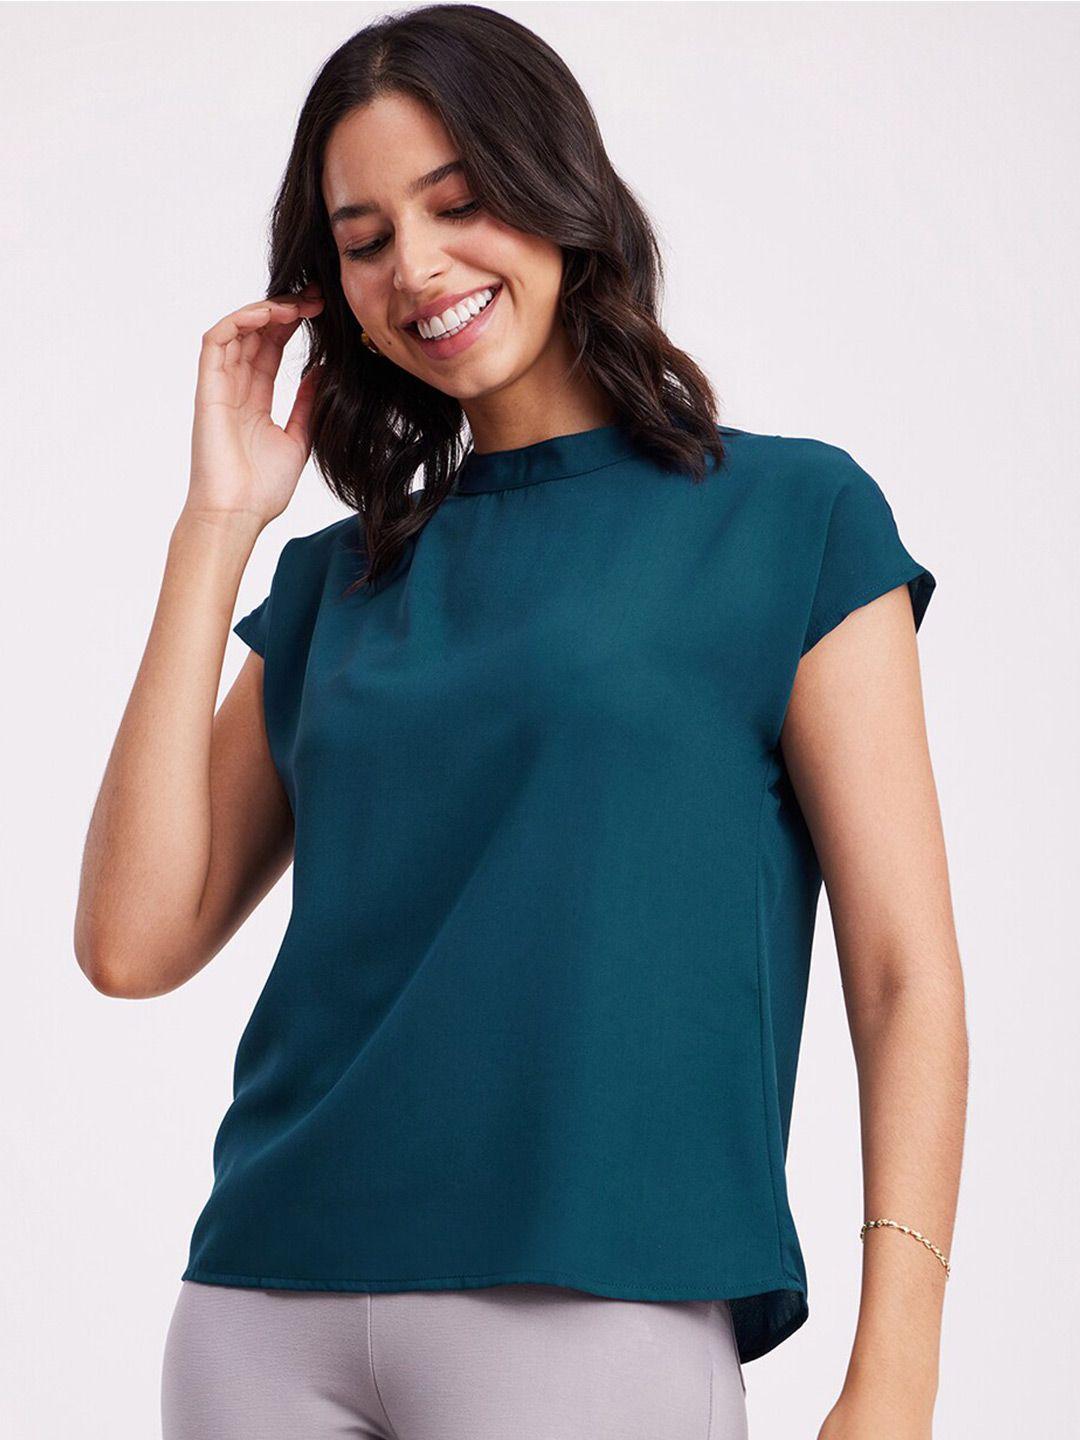 FableStreet High Neck Extended Sleeves Top